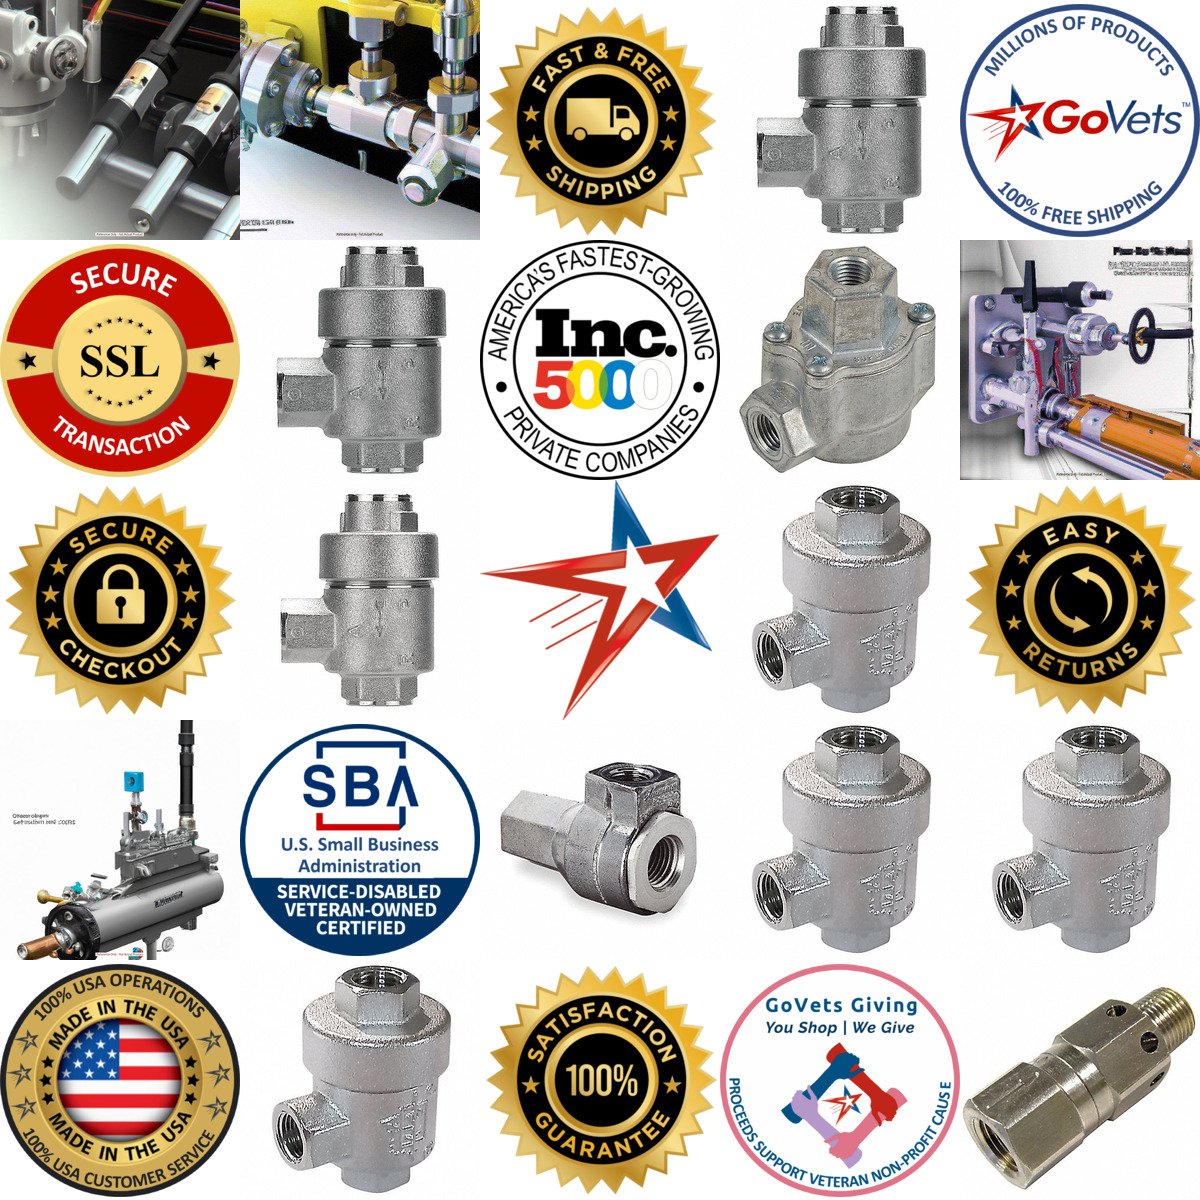 A selection of Pneumatic Cylinder Controls products on GoVets